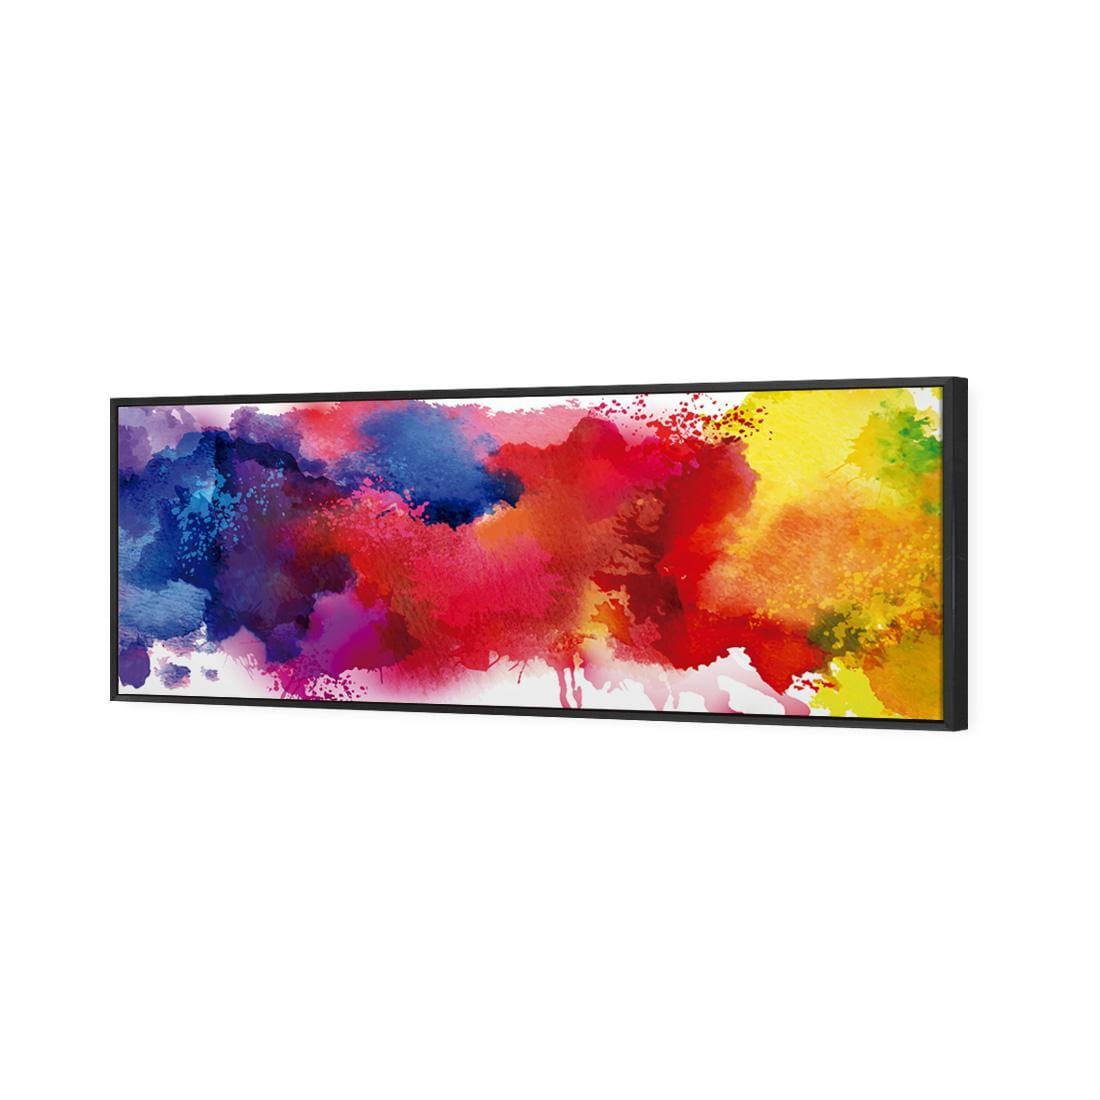 Primary Stains (long) - wallart-australia - Canvas